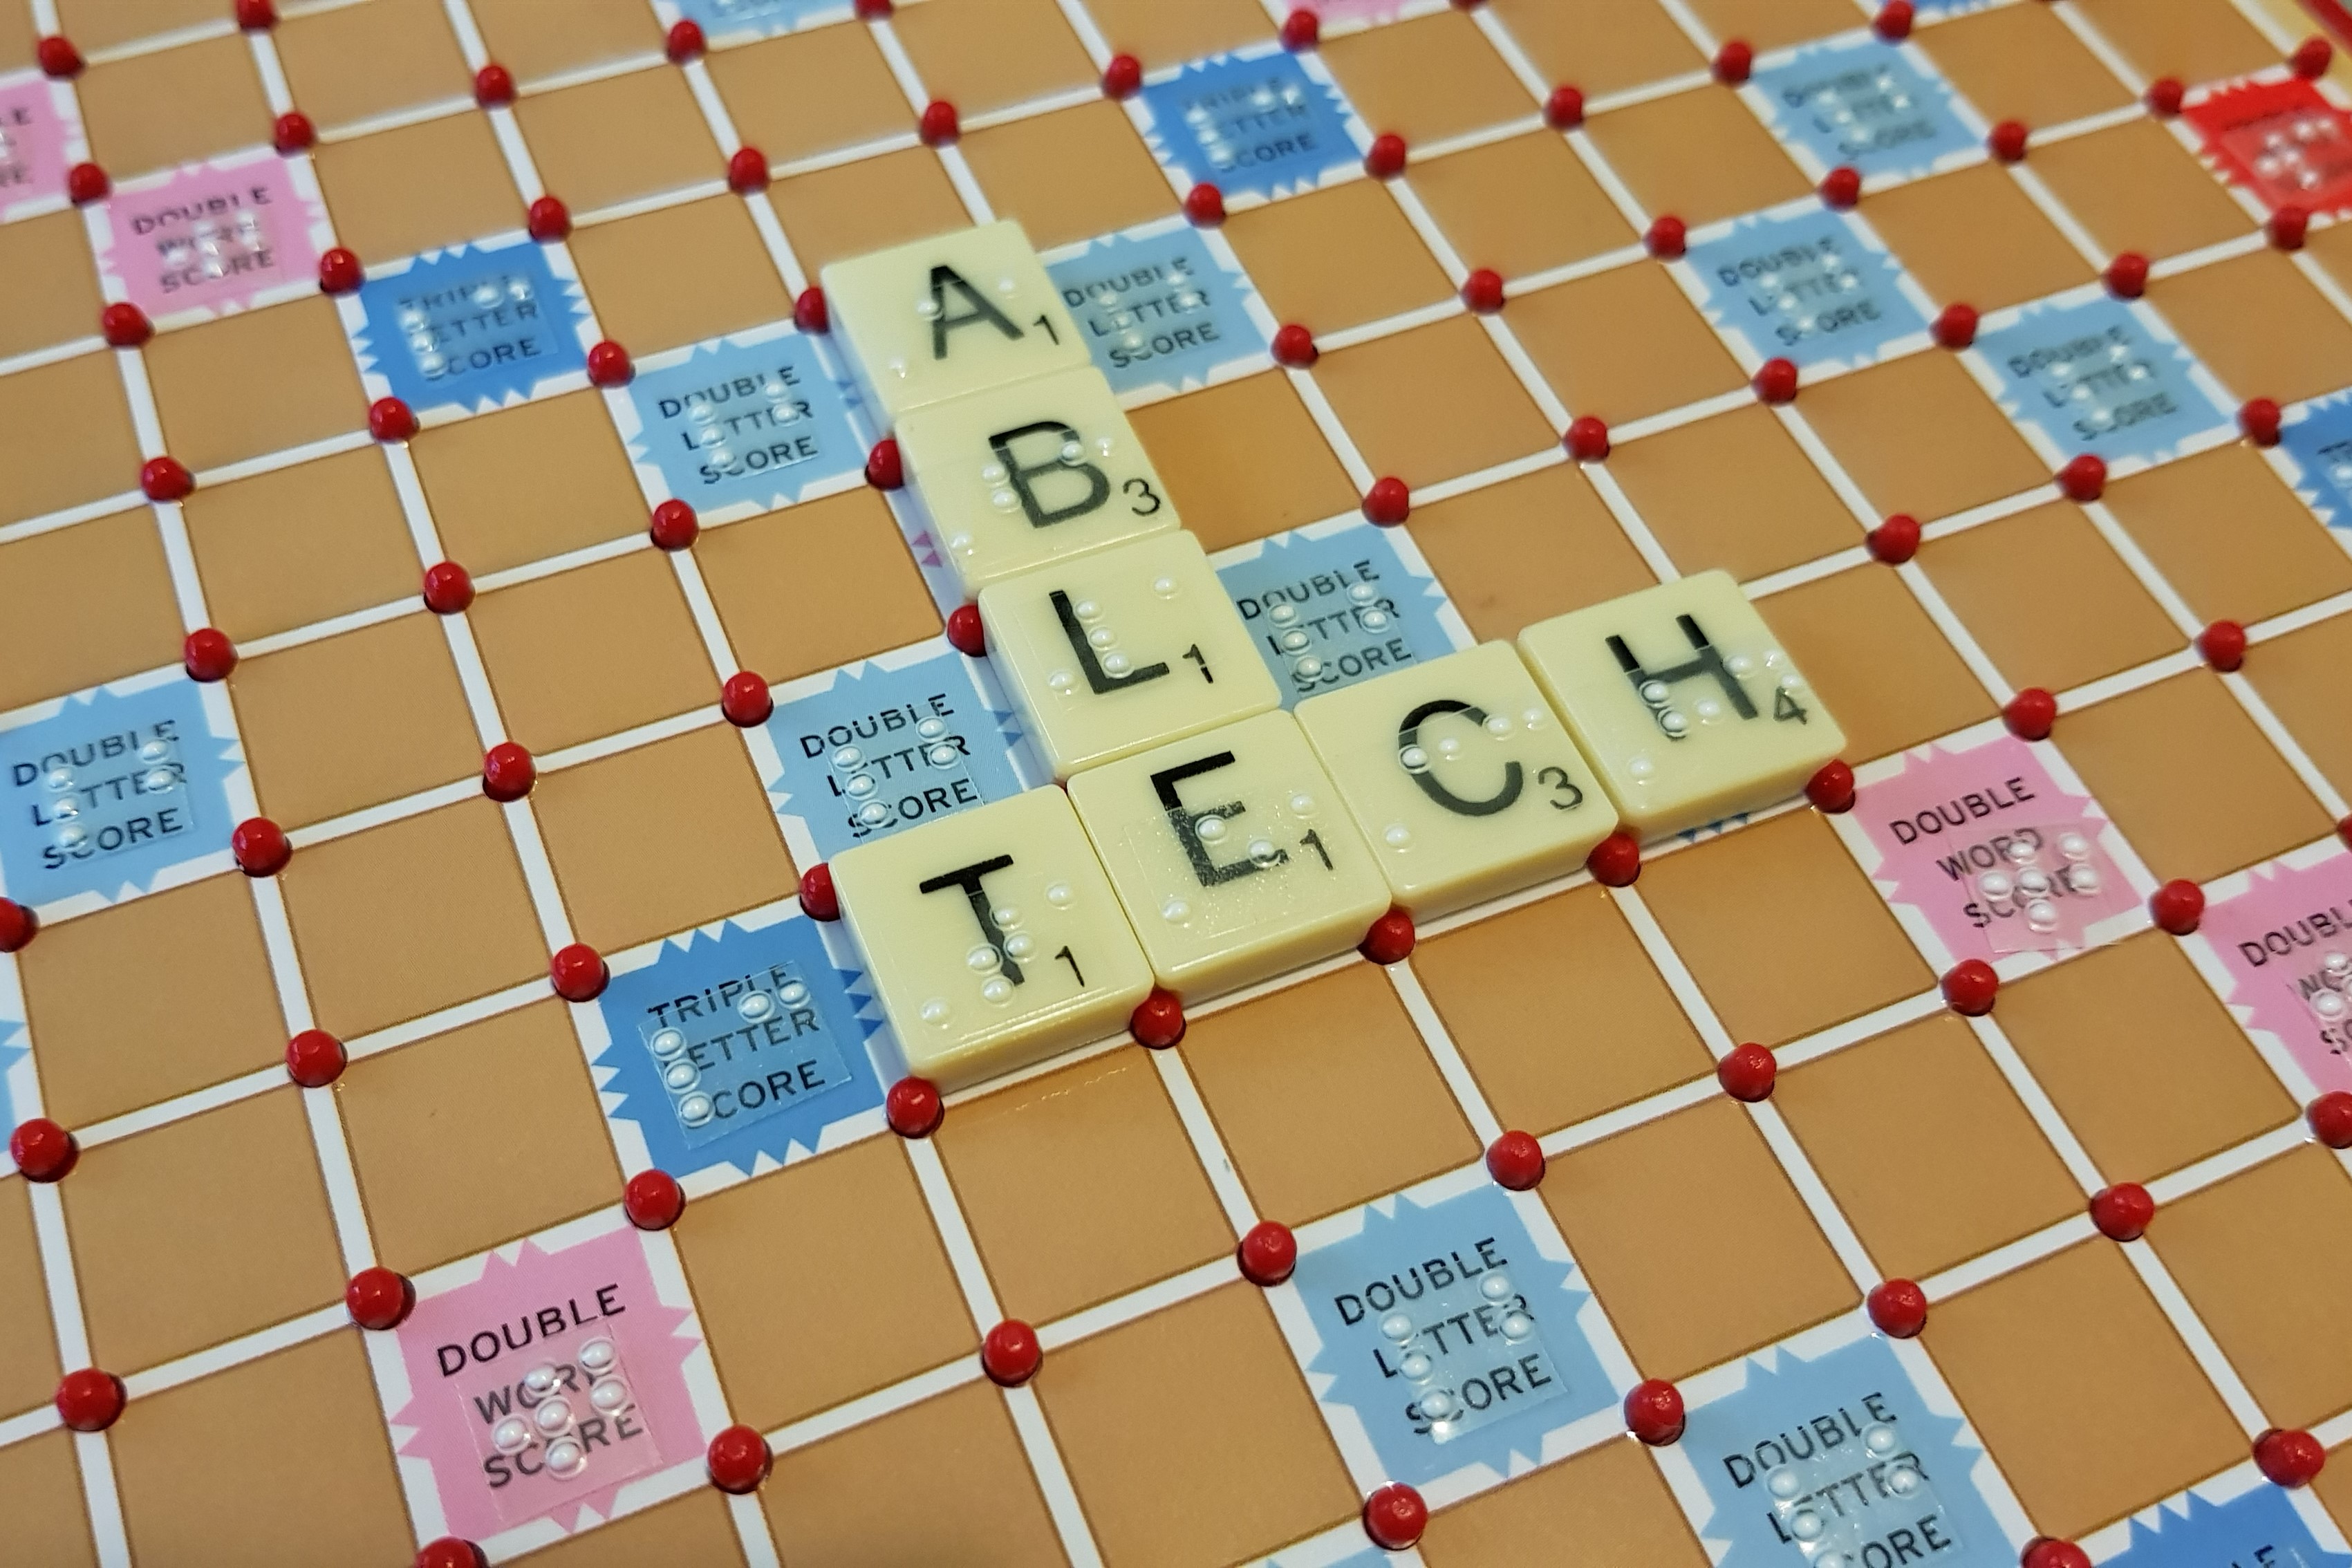 A Scrabble board and letter tiles labelled with braille. The letter tiles placed on the board have the word “TECH” formed across the middle of the board, with the word “ABLE” formed on top of the letter “E”.